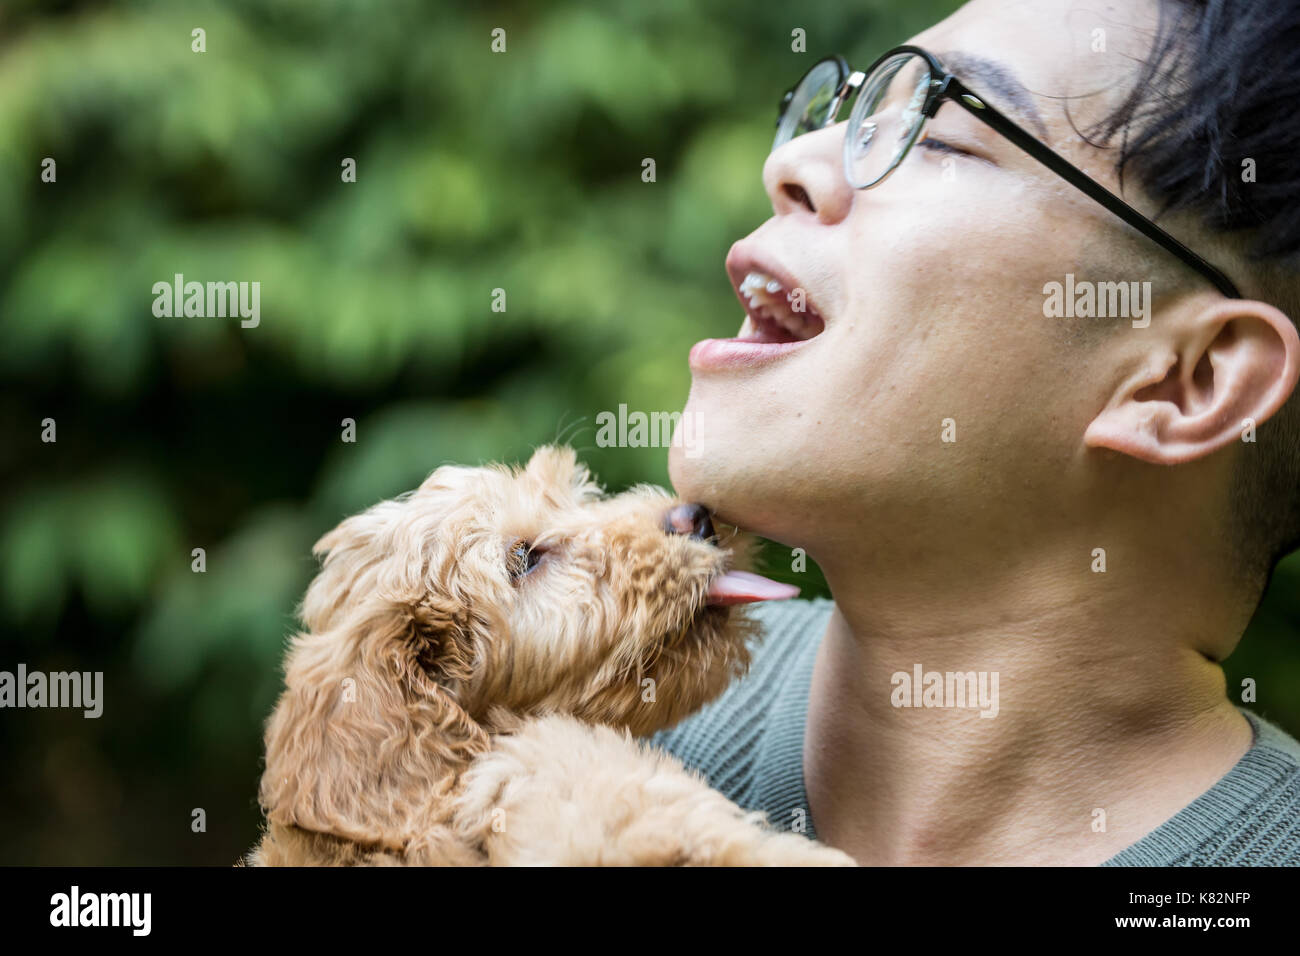 Eight week old Goldendoodle puppy 'Bella' playfully licking / kissing her owner, in Issaquah, Washington, USA Stock Photo